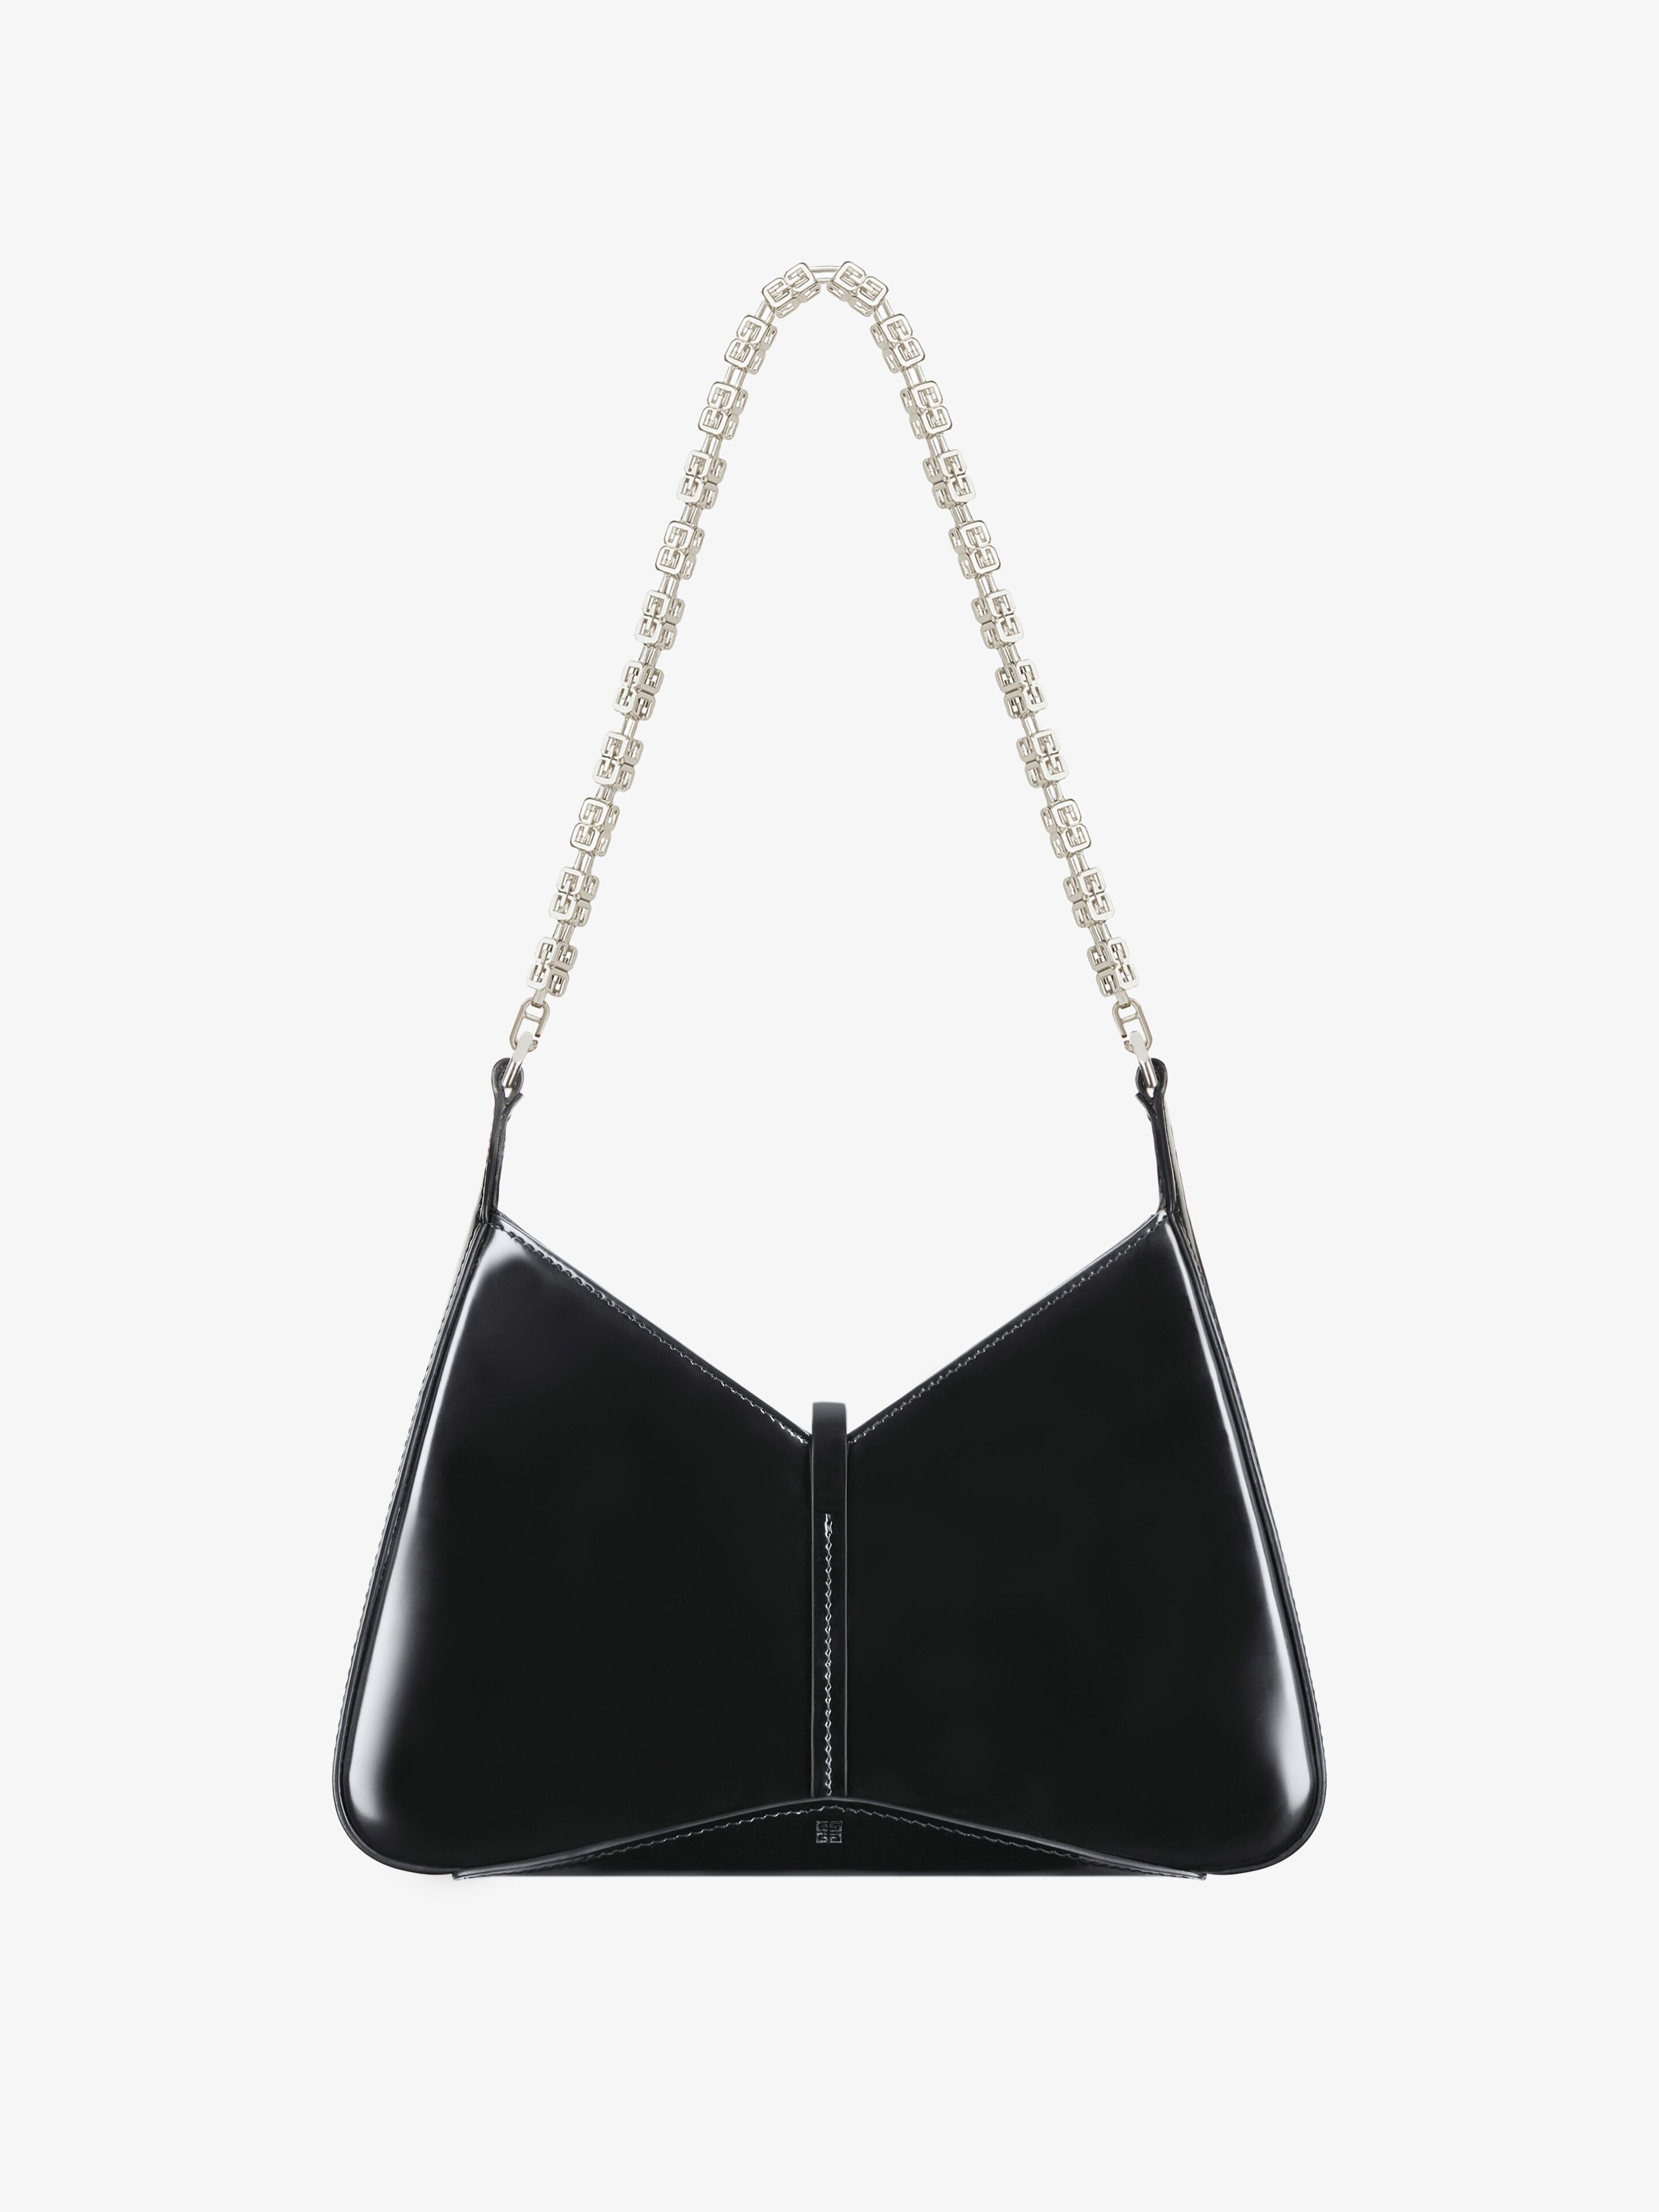 SMALL CUT OUT BAG IN SHINY LEATHER WITH CHAIN - 6